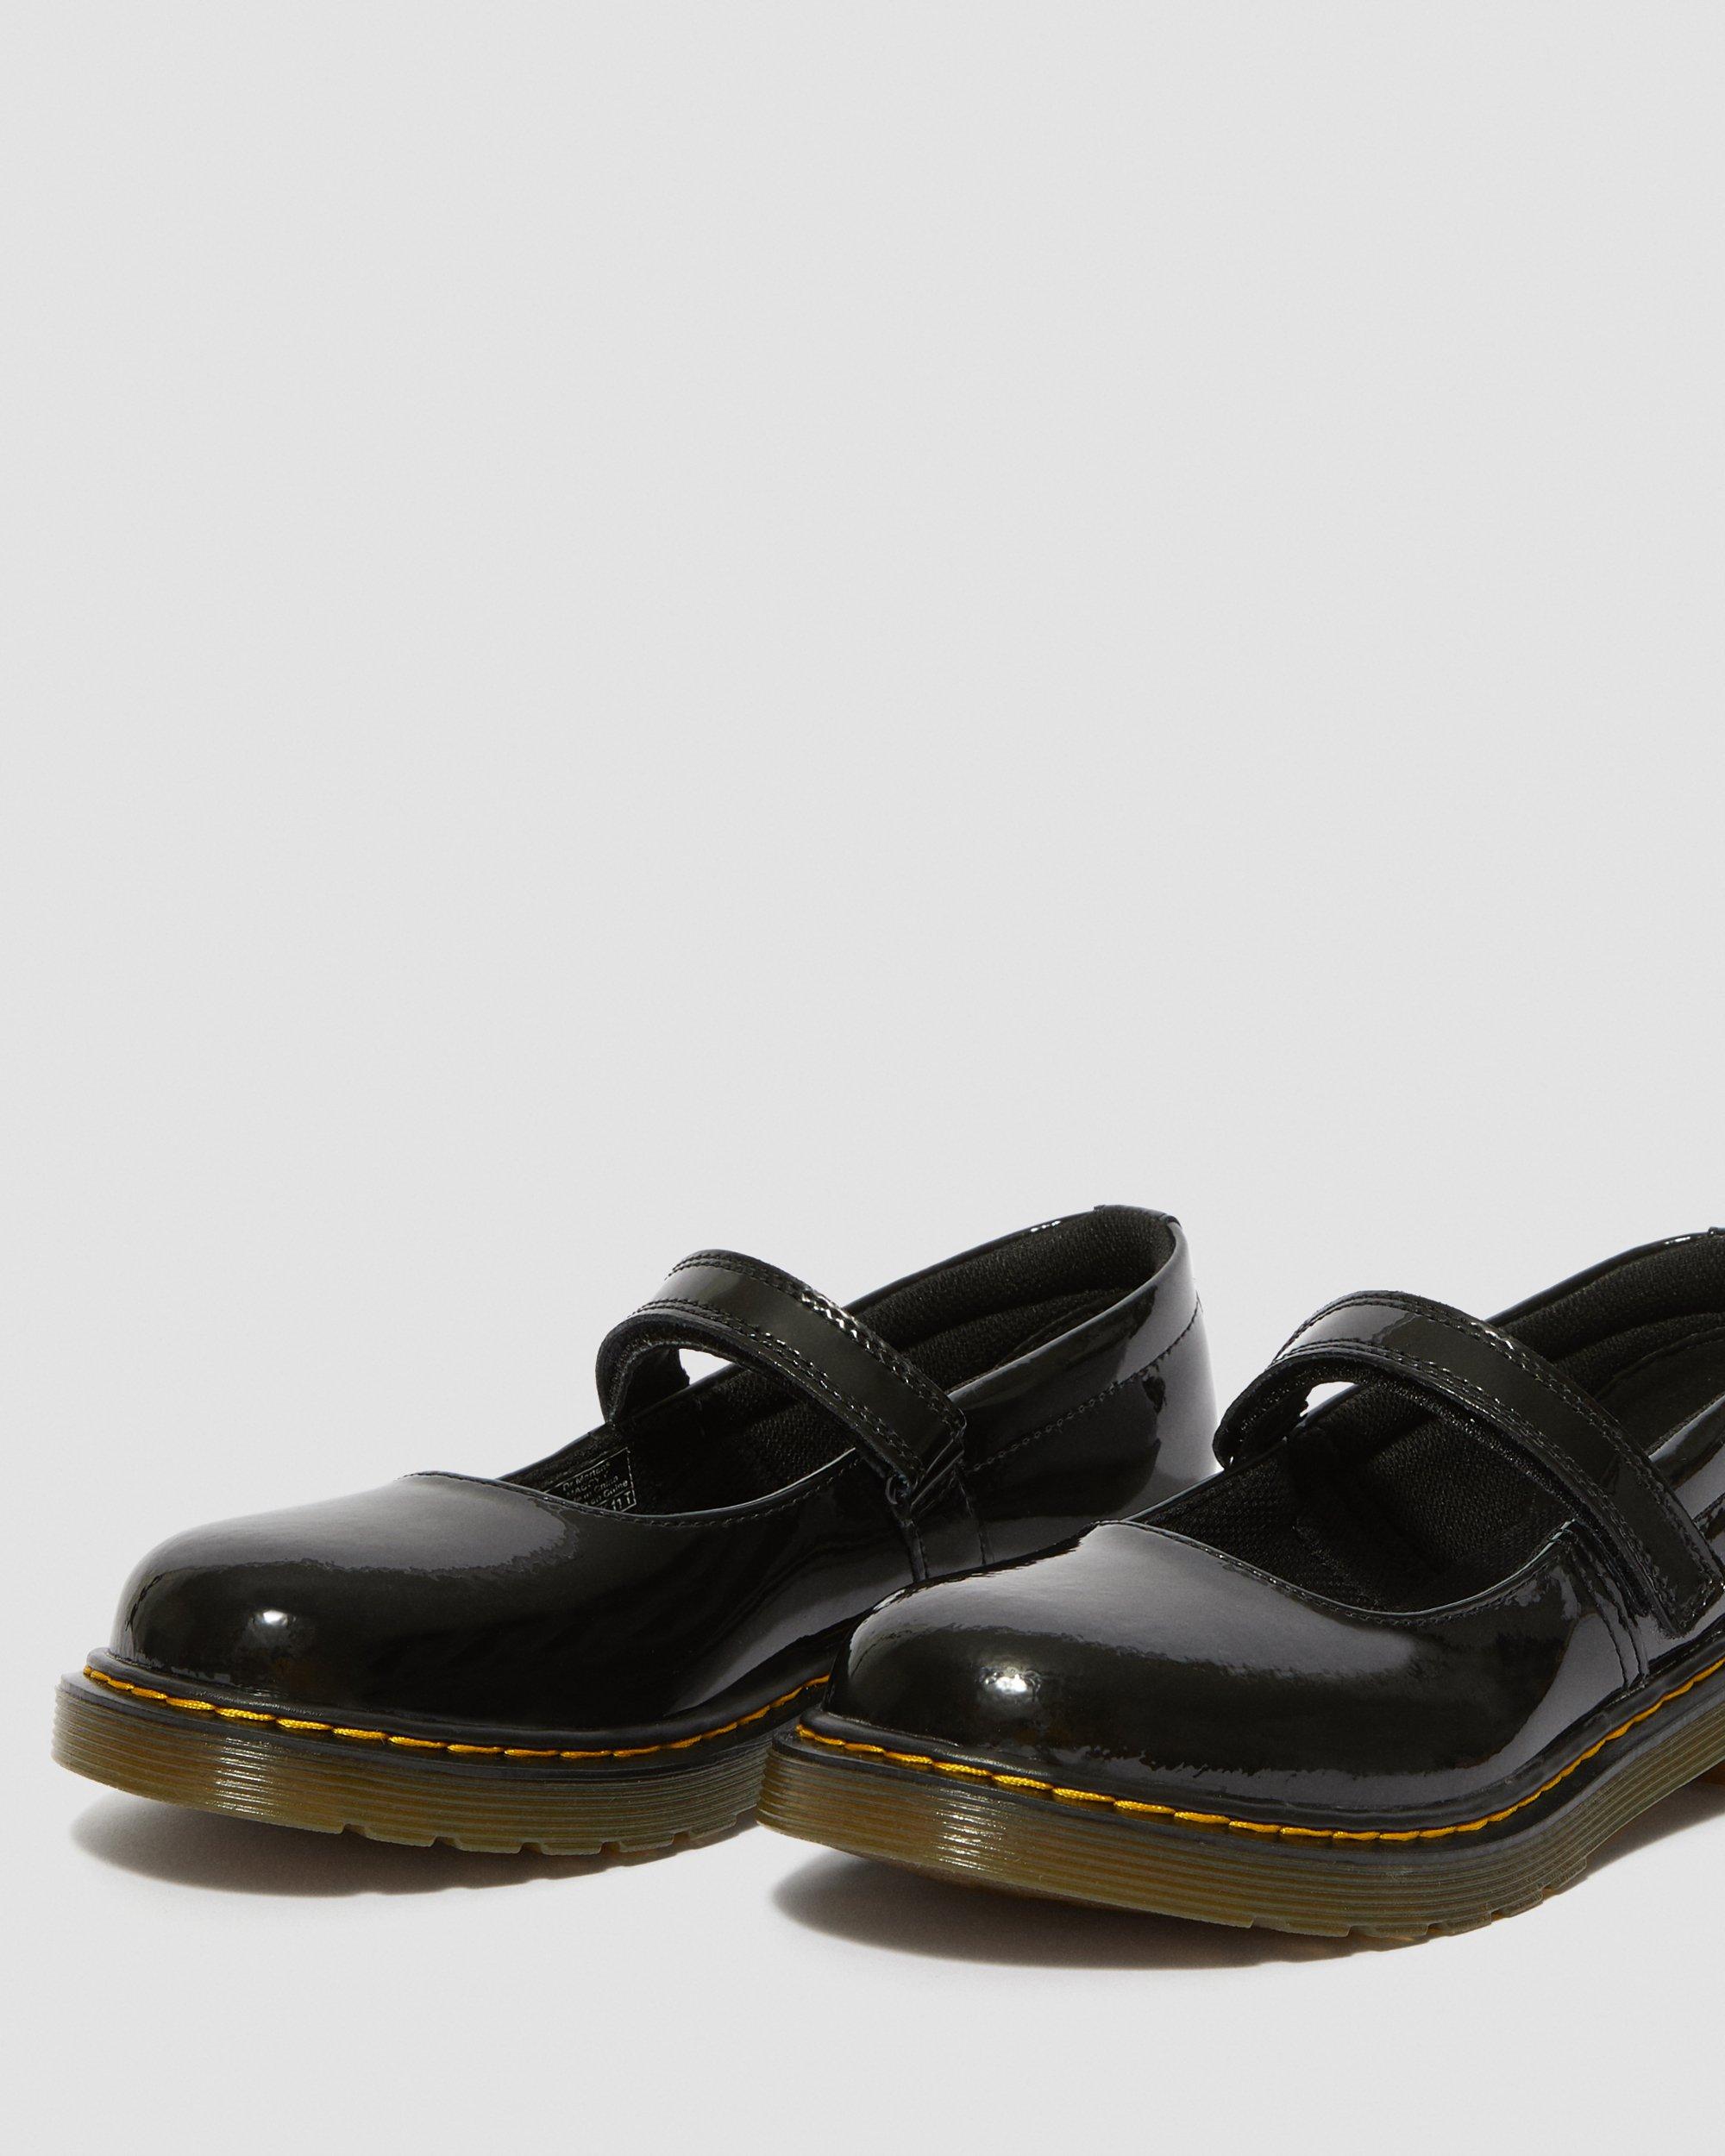 YOUTH MACCY PATENT SHOES in Black